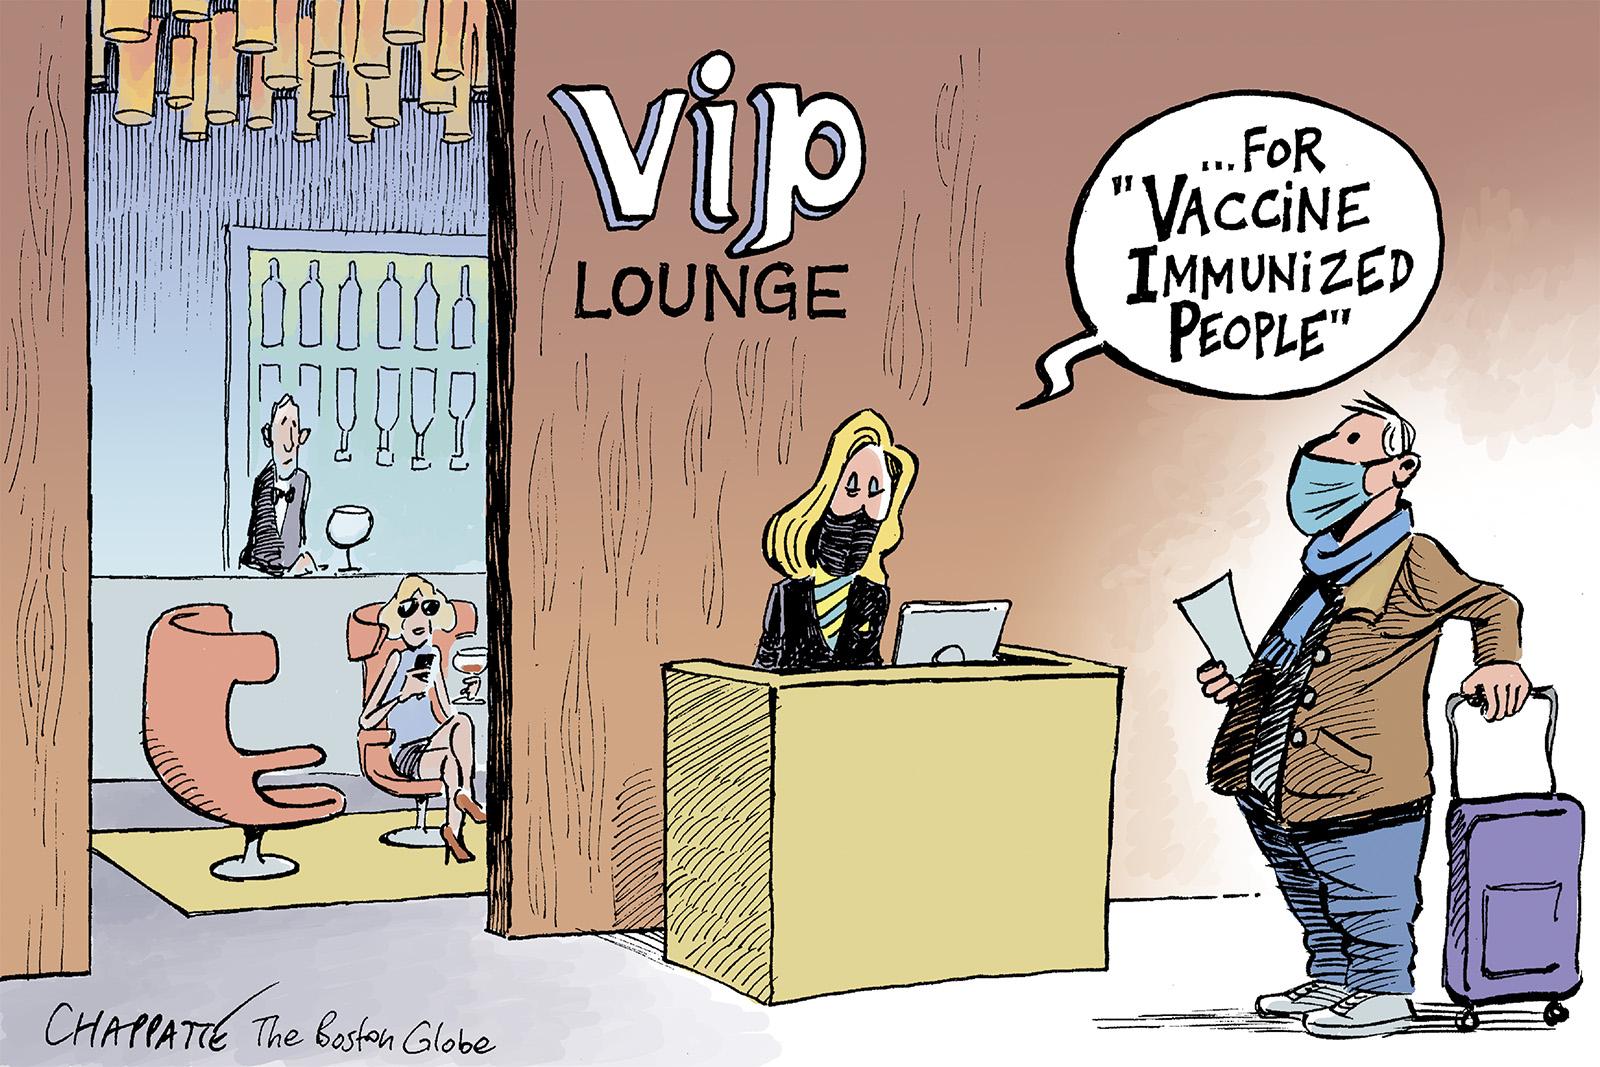 Vaccination, the ultimate travel upgrade